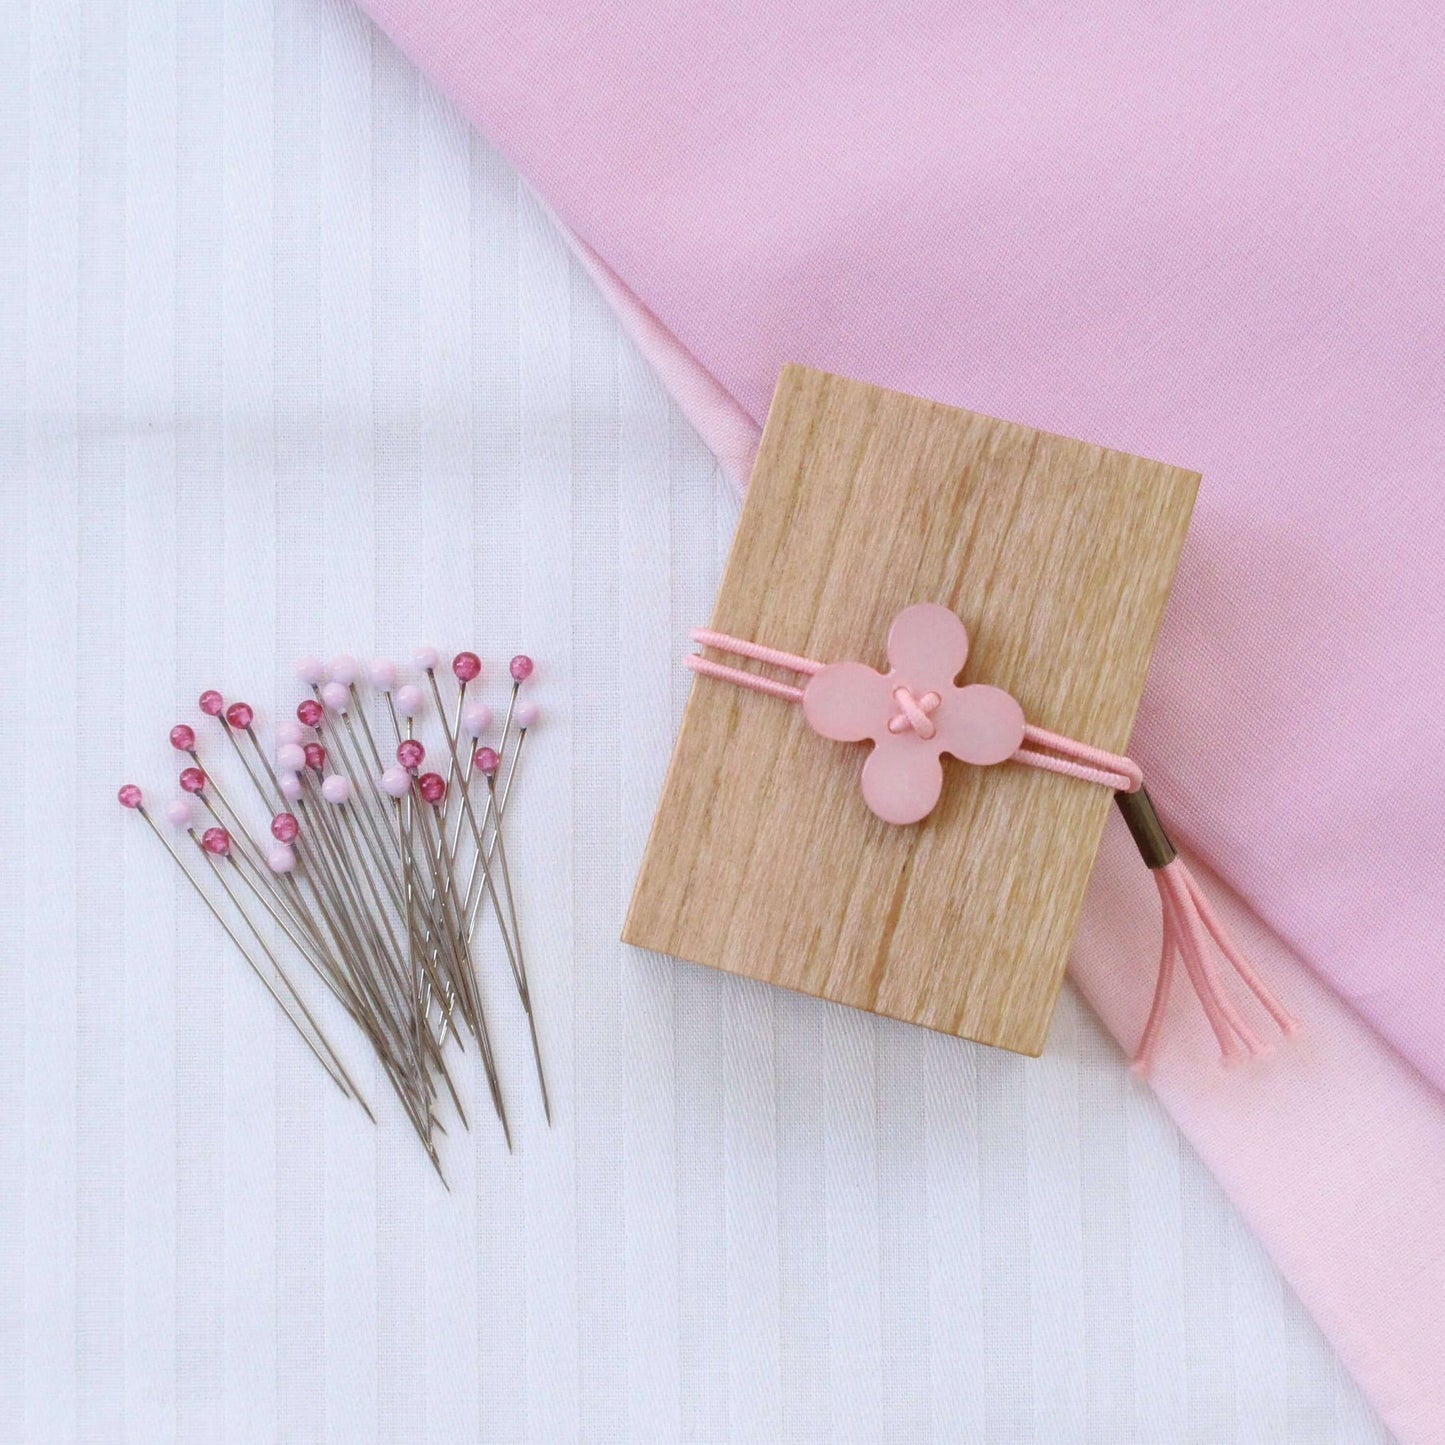 Pink cohana glass headed pins sitting alongside wooden packaging box with pink shell toggle